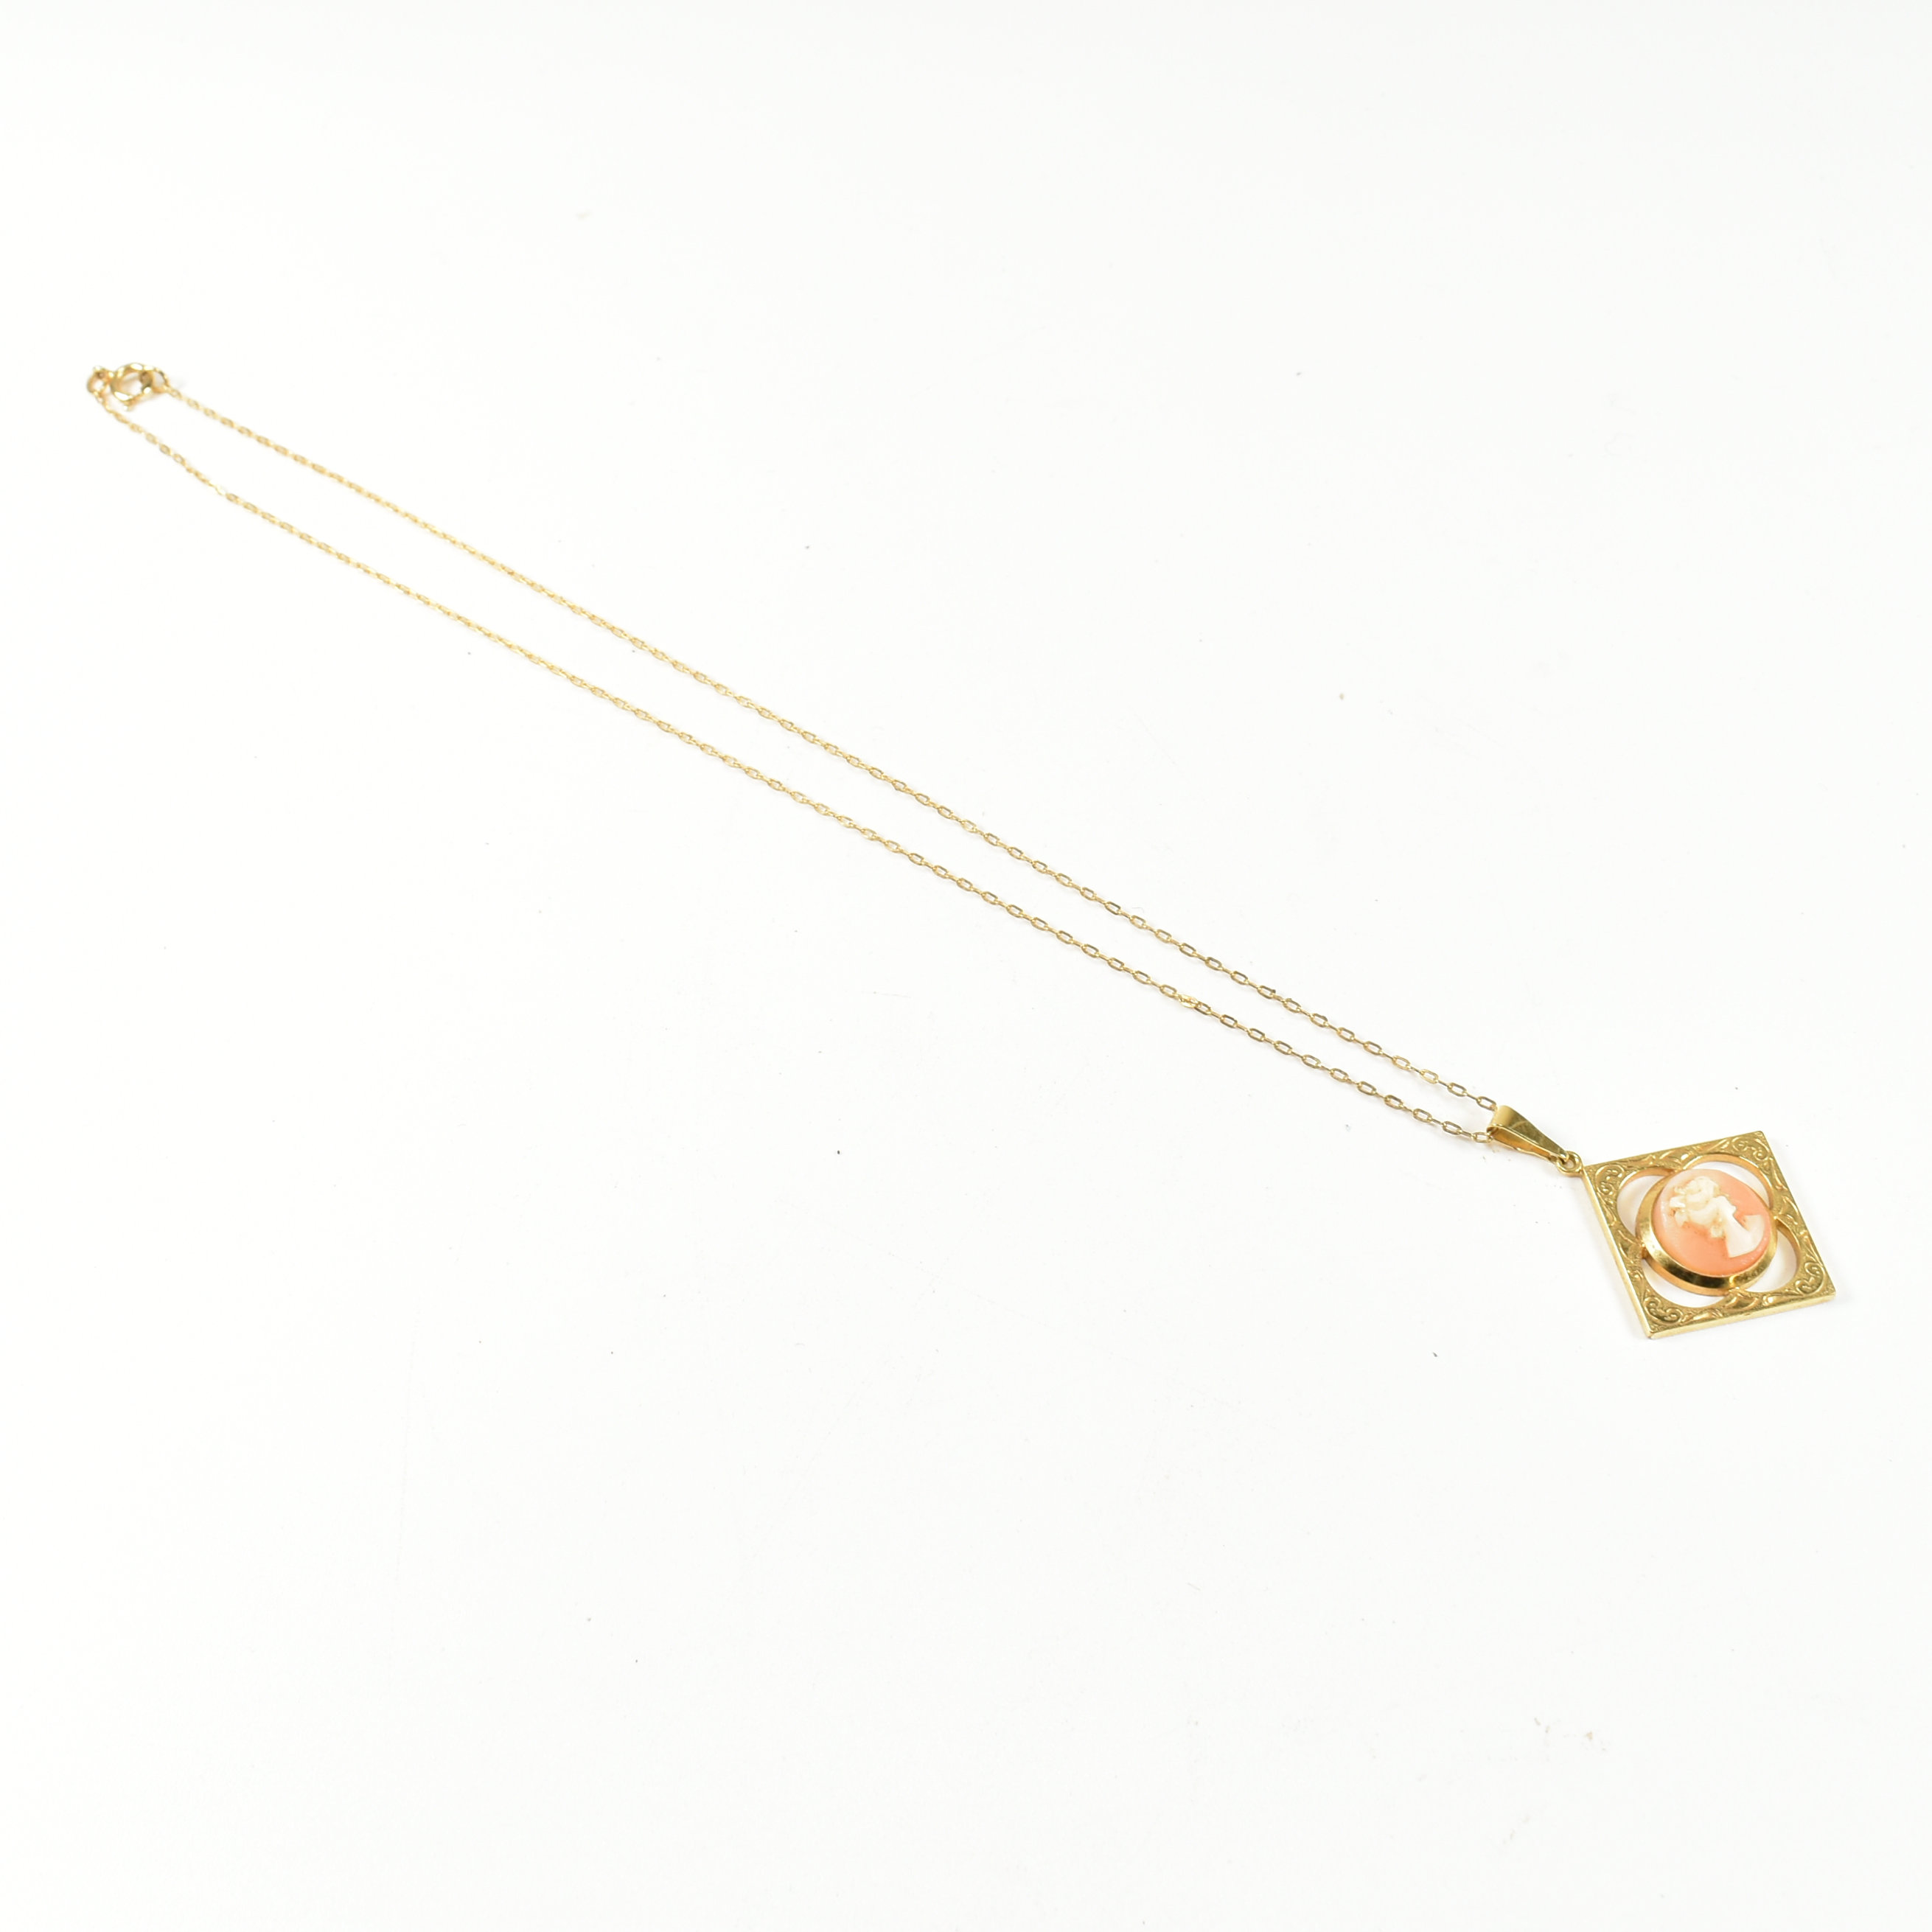 9CT GOLD CAMEO PENDANT NECKLACE - Image 2 of 5